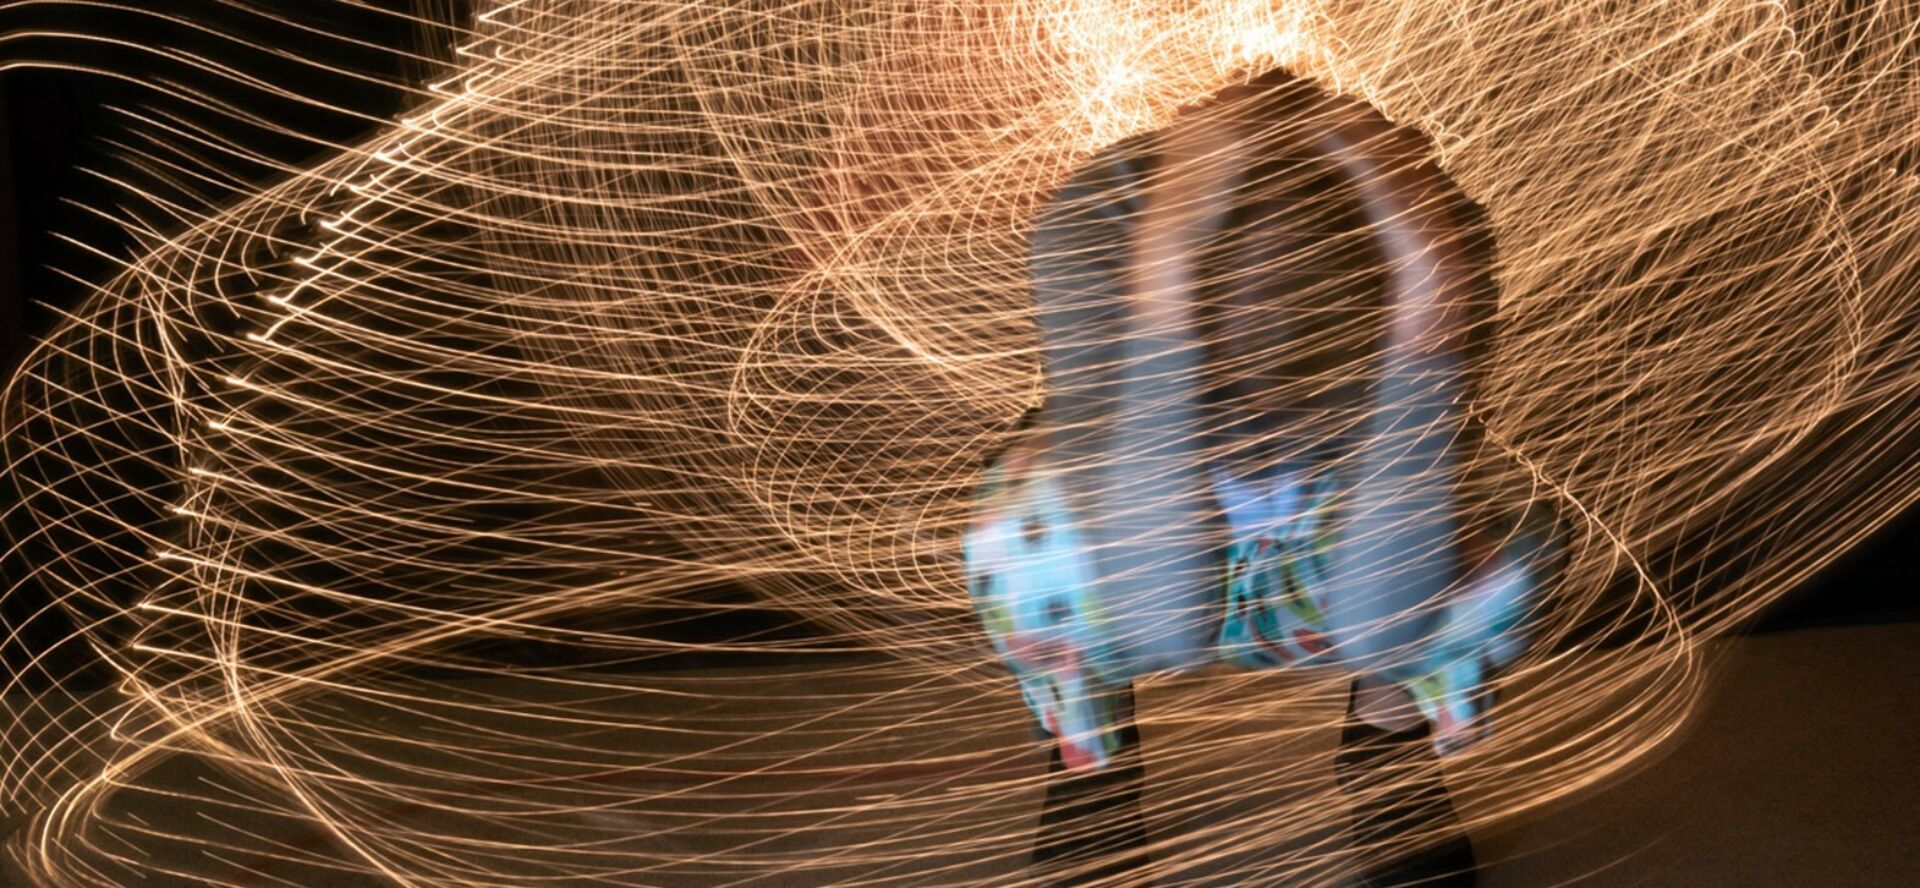 An interactive exhibition at the Woskob gallery of a participant creating unique spatial design with light painting.